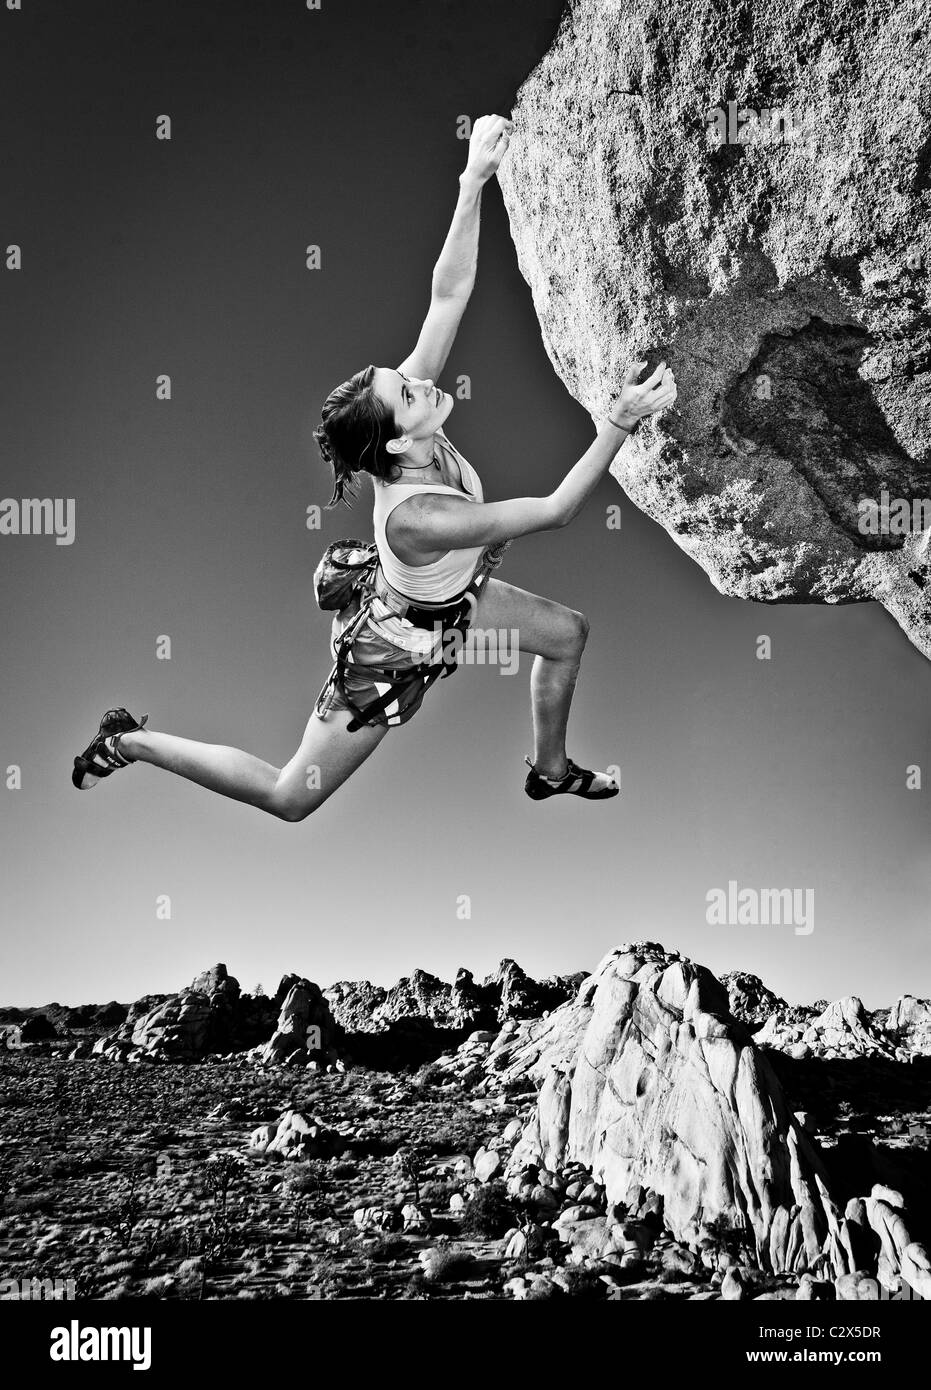 Female rock climber struggles for her next grip on a challenging ascent. Stock Photo